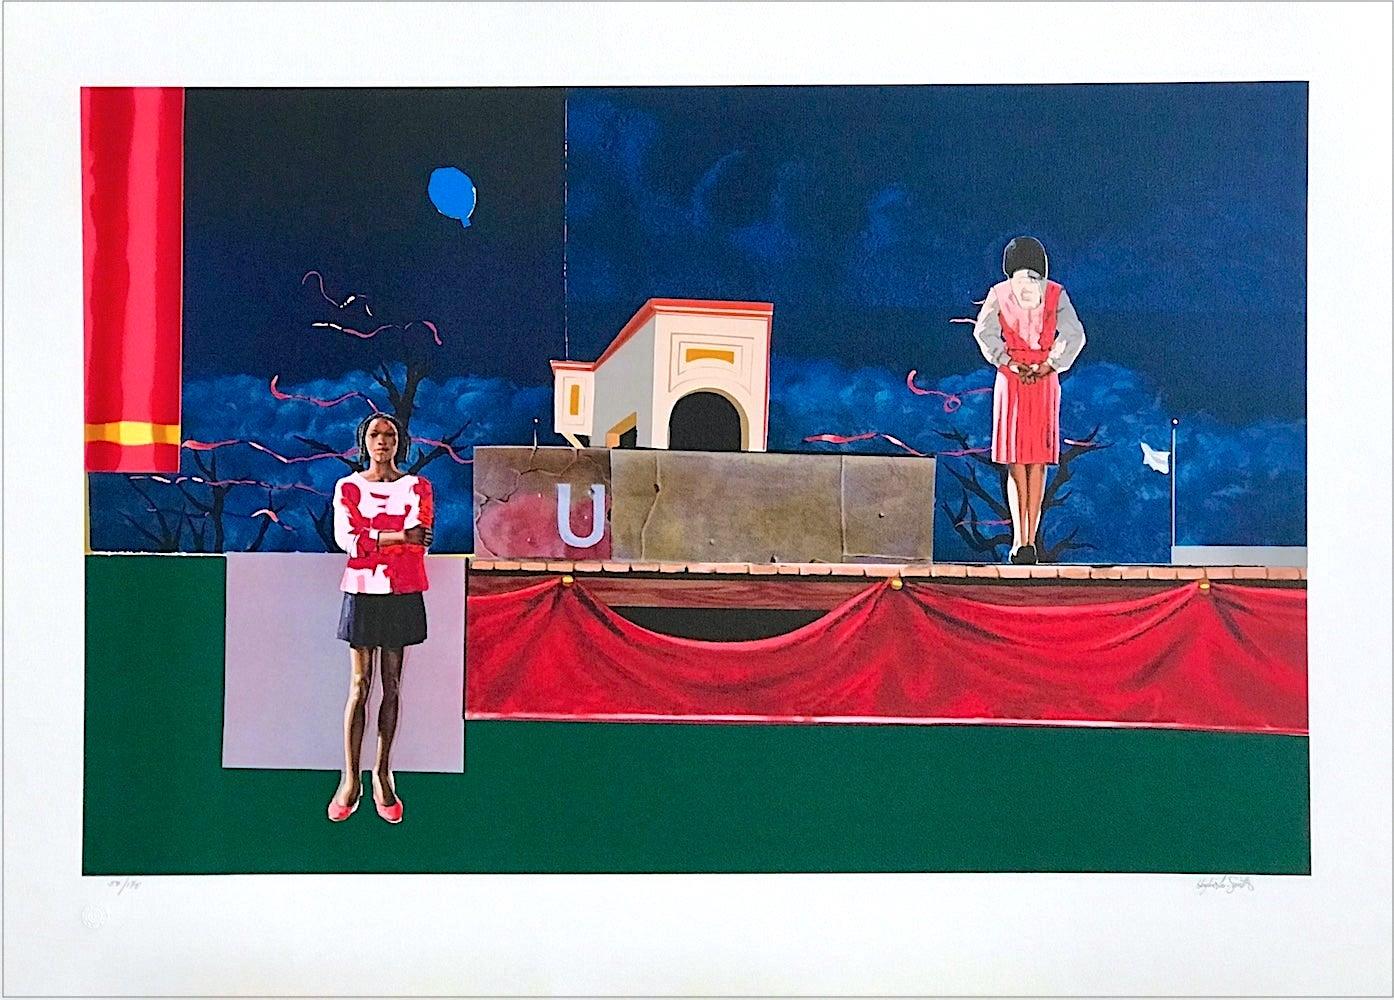 NOCTURNE Signed Lithograph Black Women Theater Stage Dark Blue Night Sky Balloon